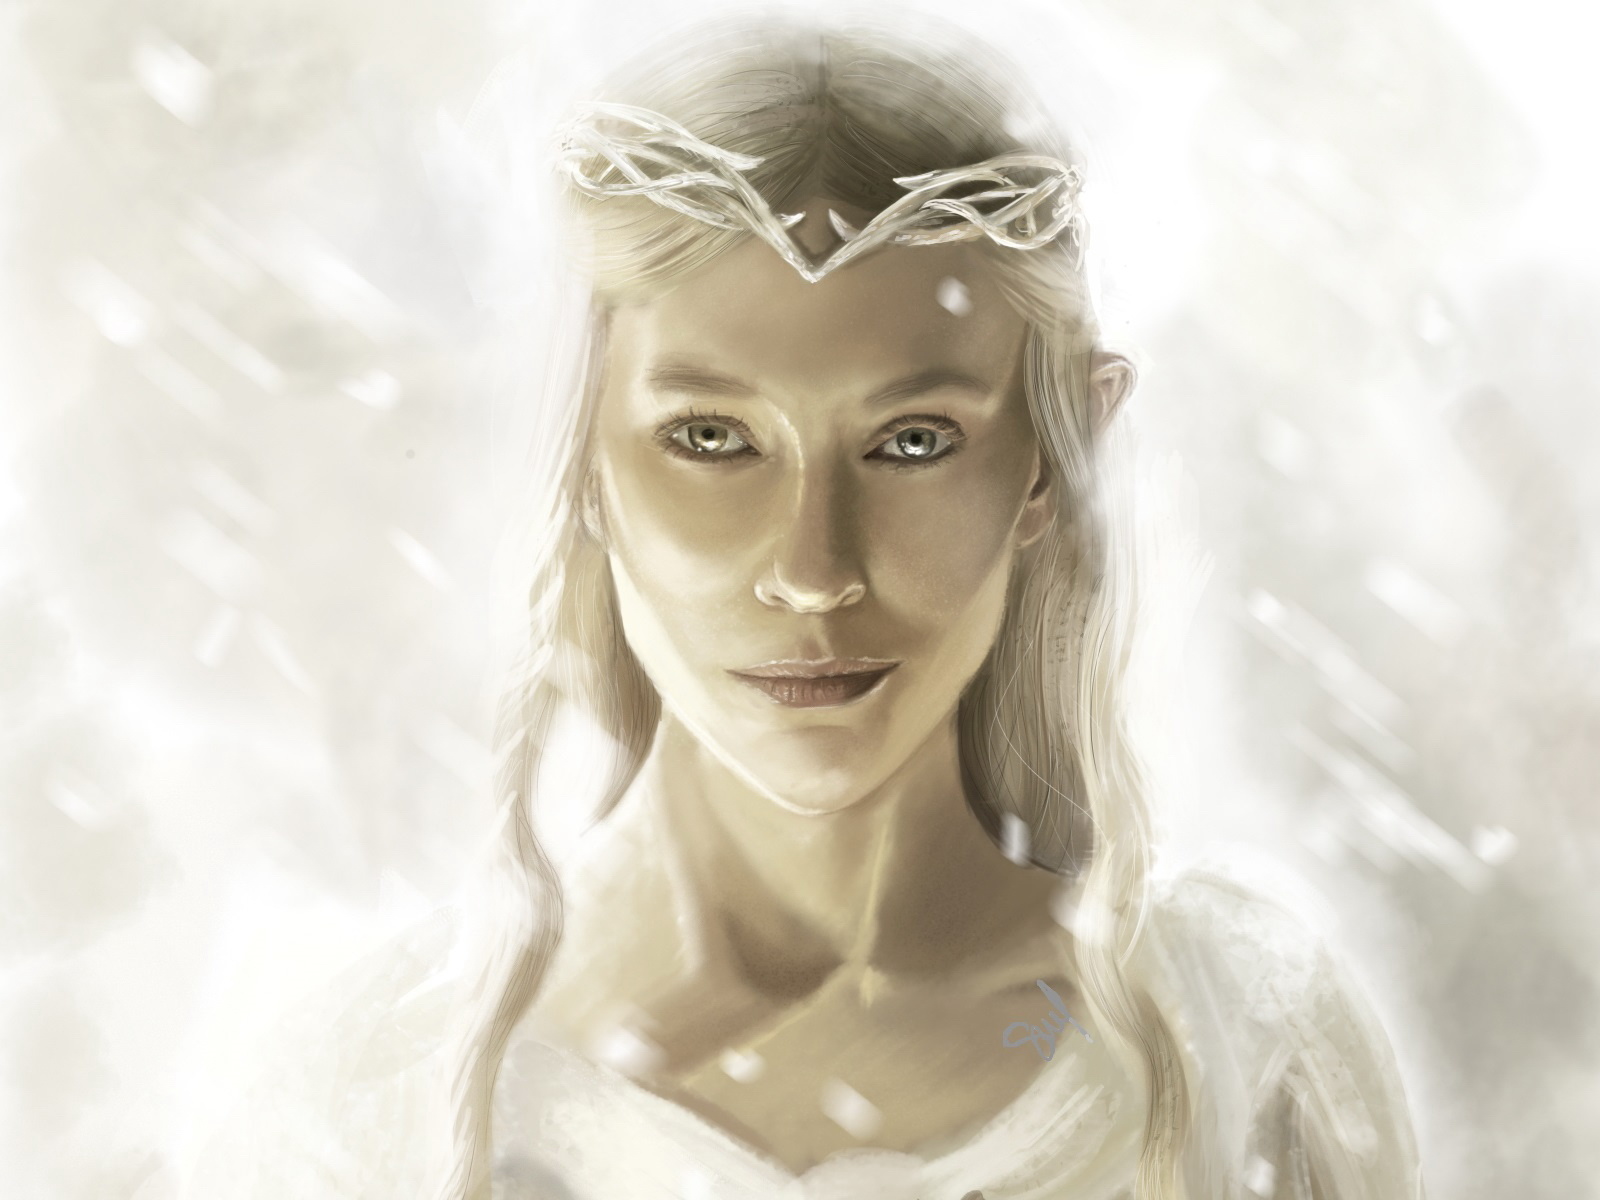 Galadriel - Cate Blanchett - Lord of the Rings - v1.0 | Stable Diffusion  LoRA | Civitai